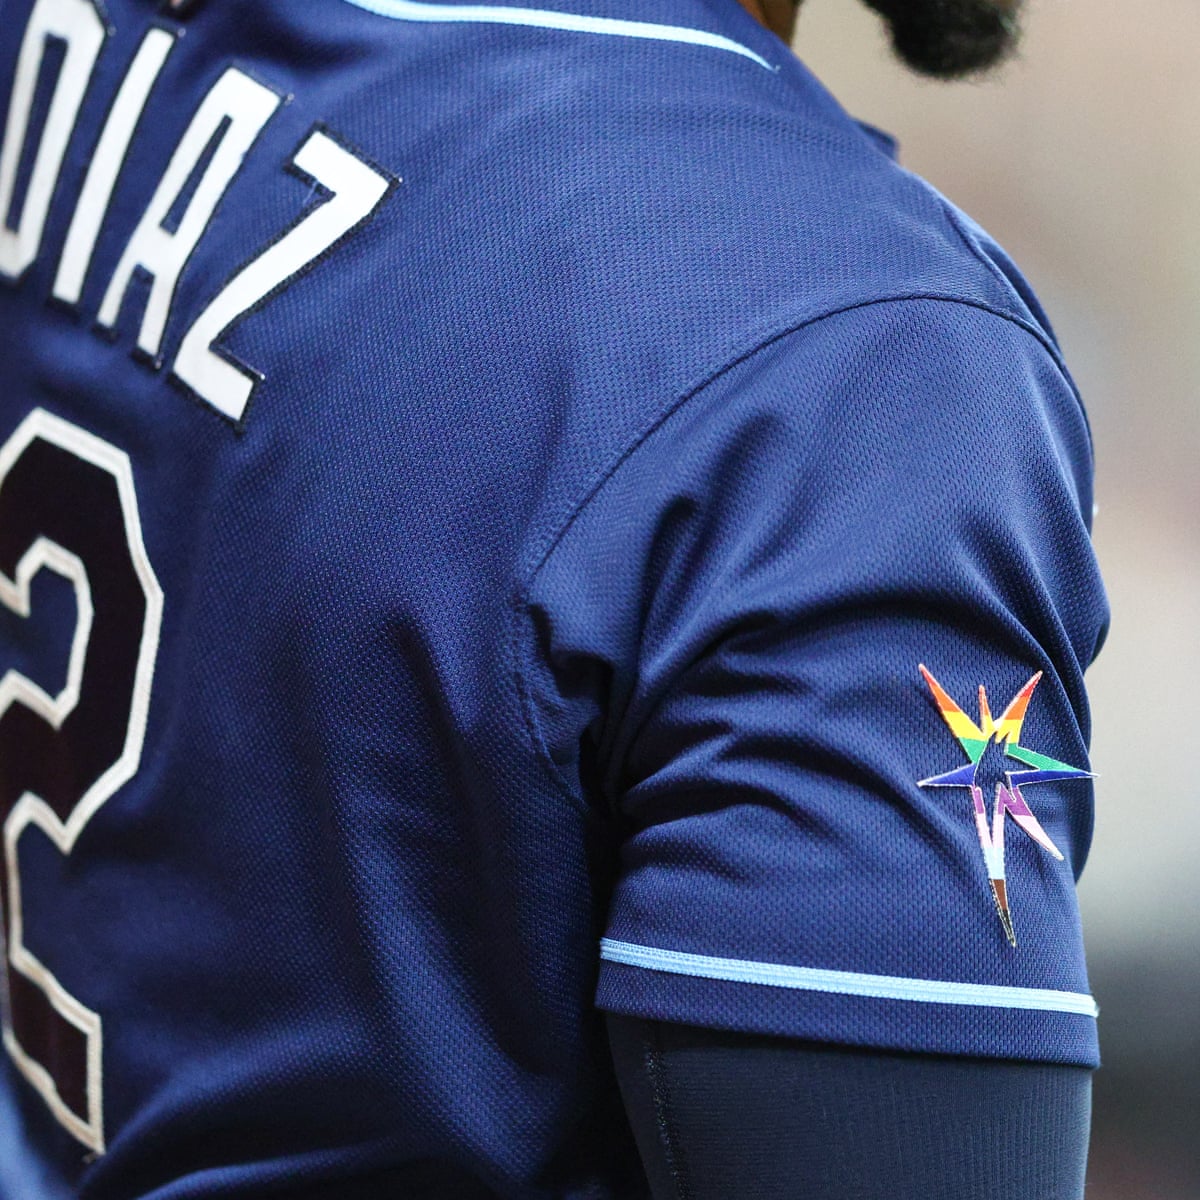 Rays Players REFUSE To Wear LGBT Pride Jersey 